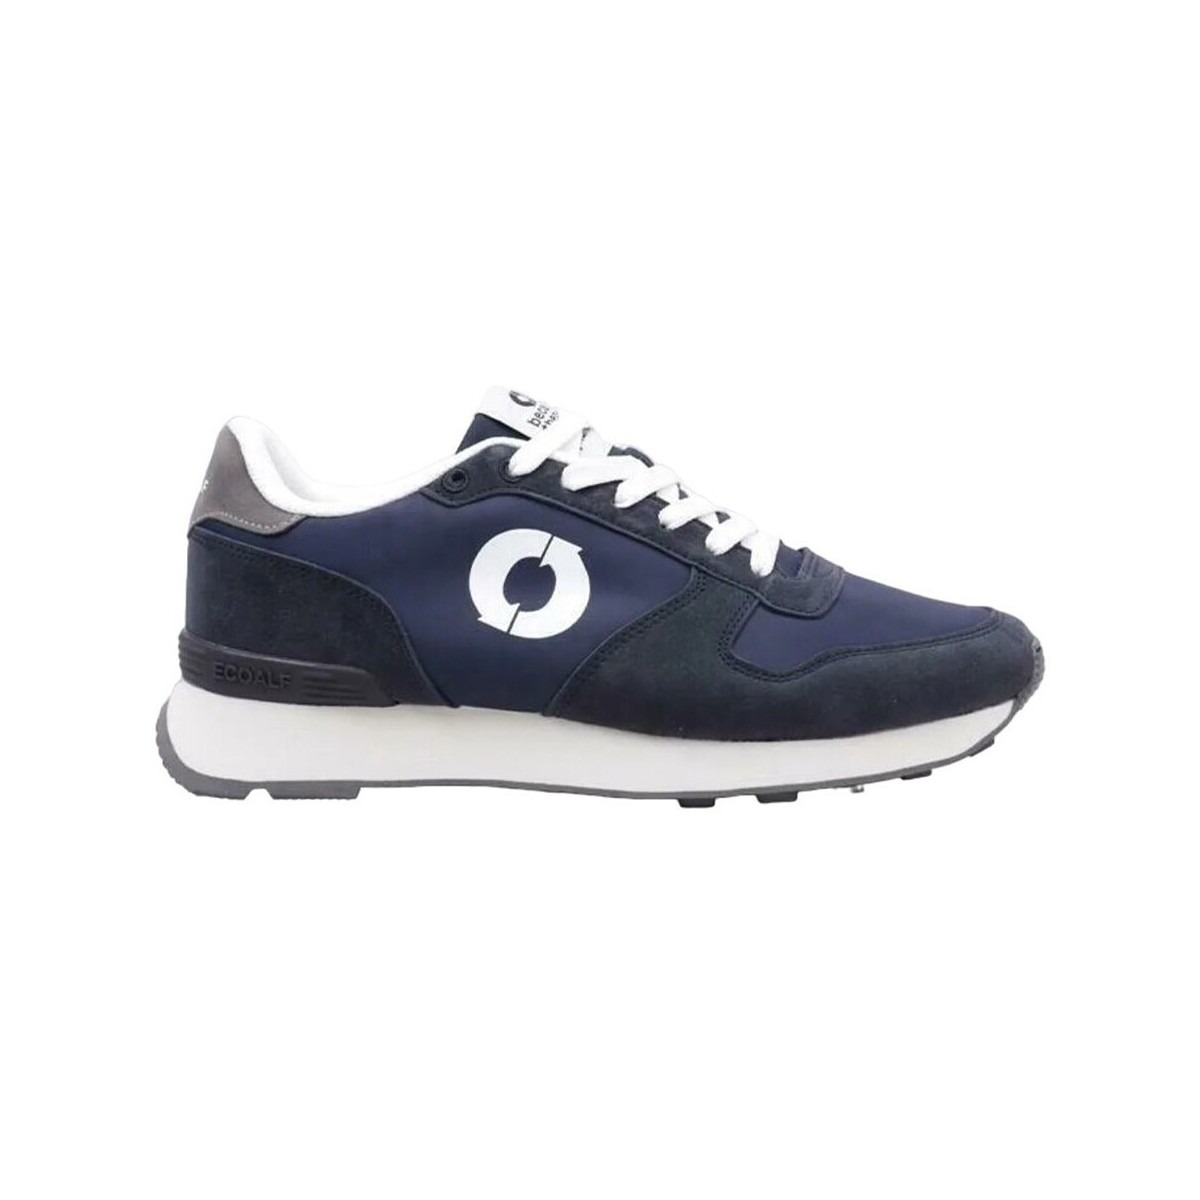 Ecoalf Blue Sneakers for Man by Spartoo GOOFASH